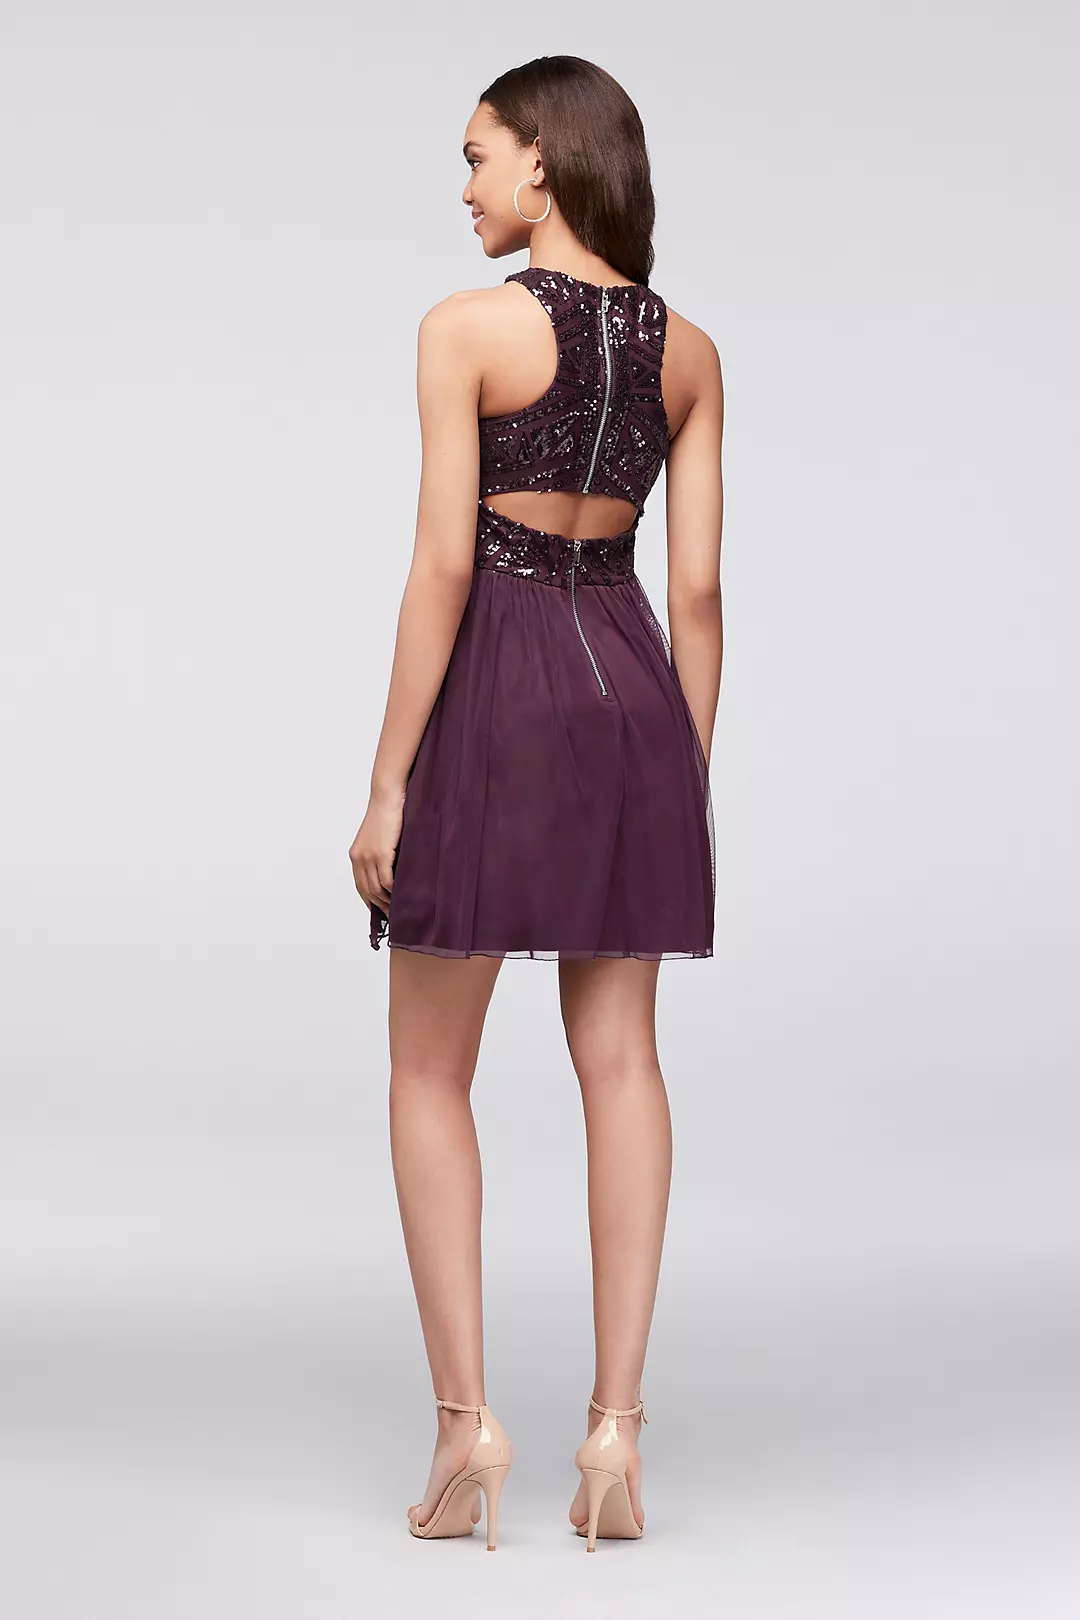 Geometric Sequin and Mesh Dress with Keyhole Back Image 2